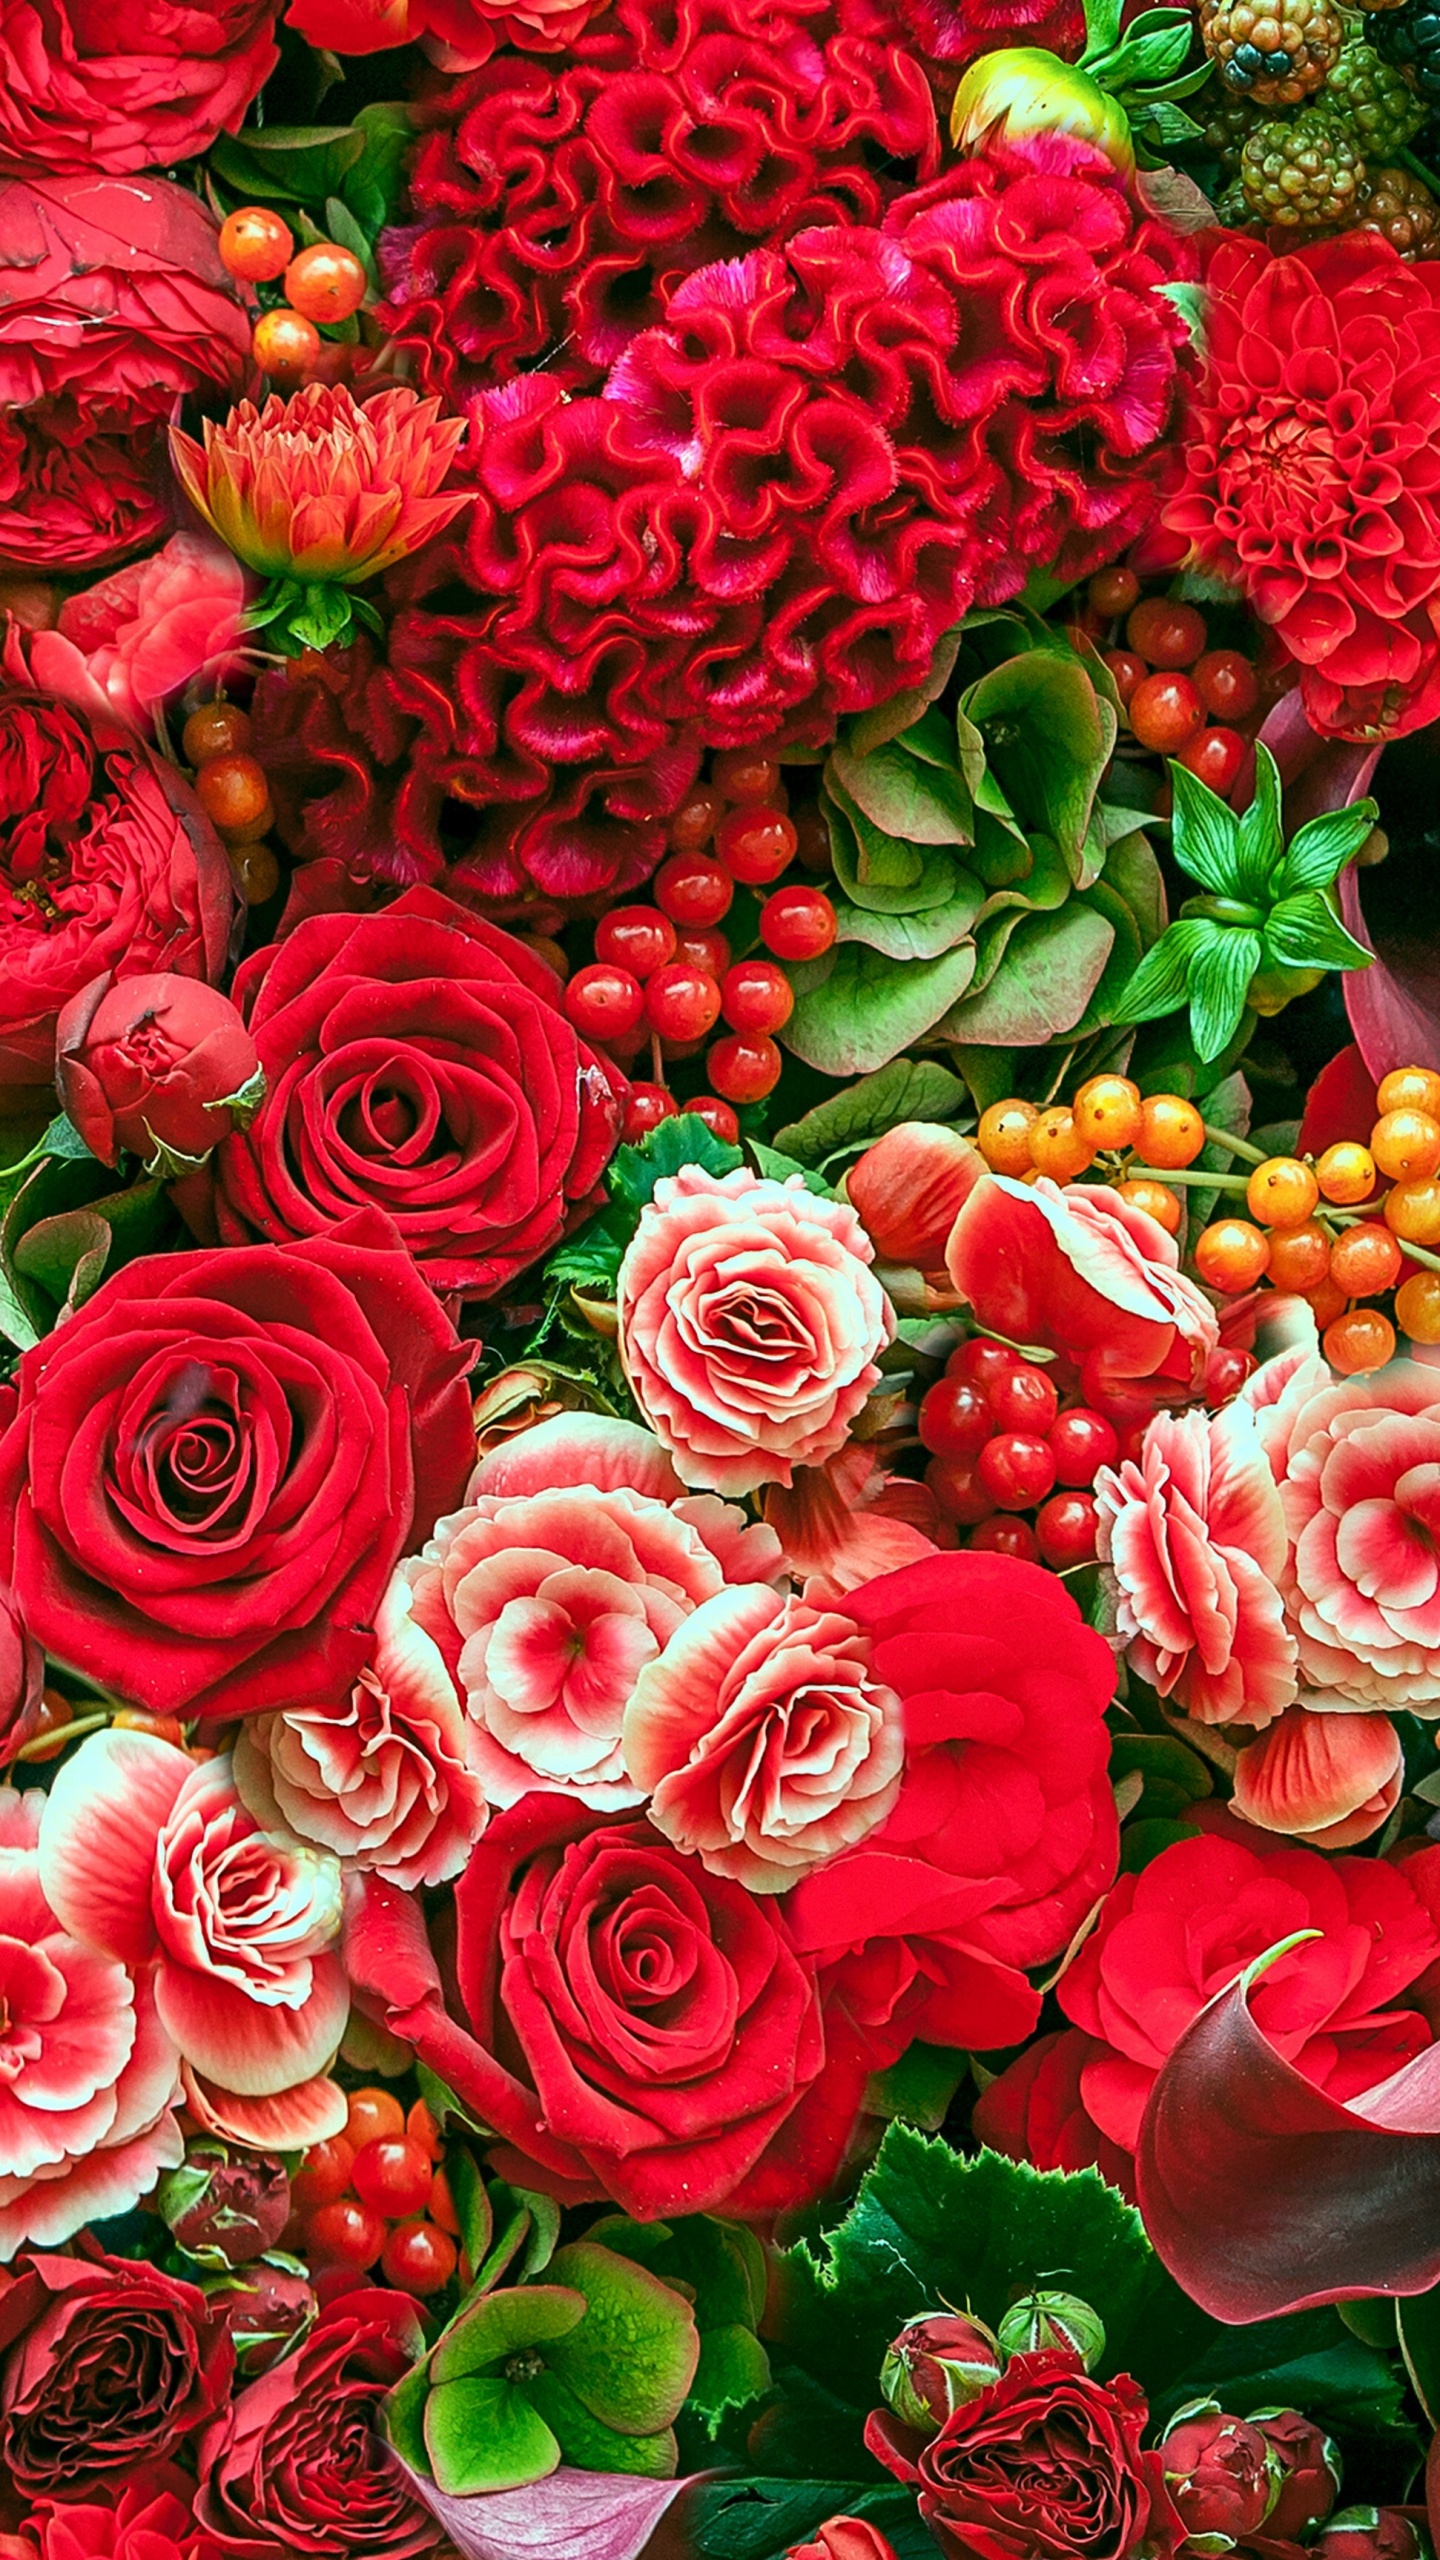 Red Roses With Green Leaves. Wallpaper in 1440x2560 Resolution